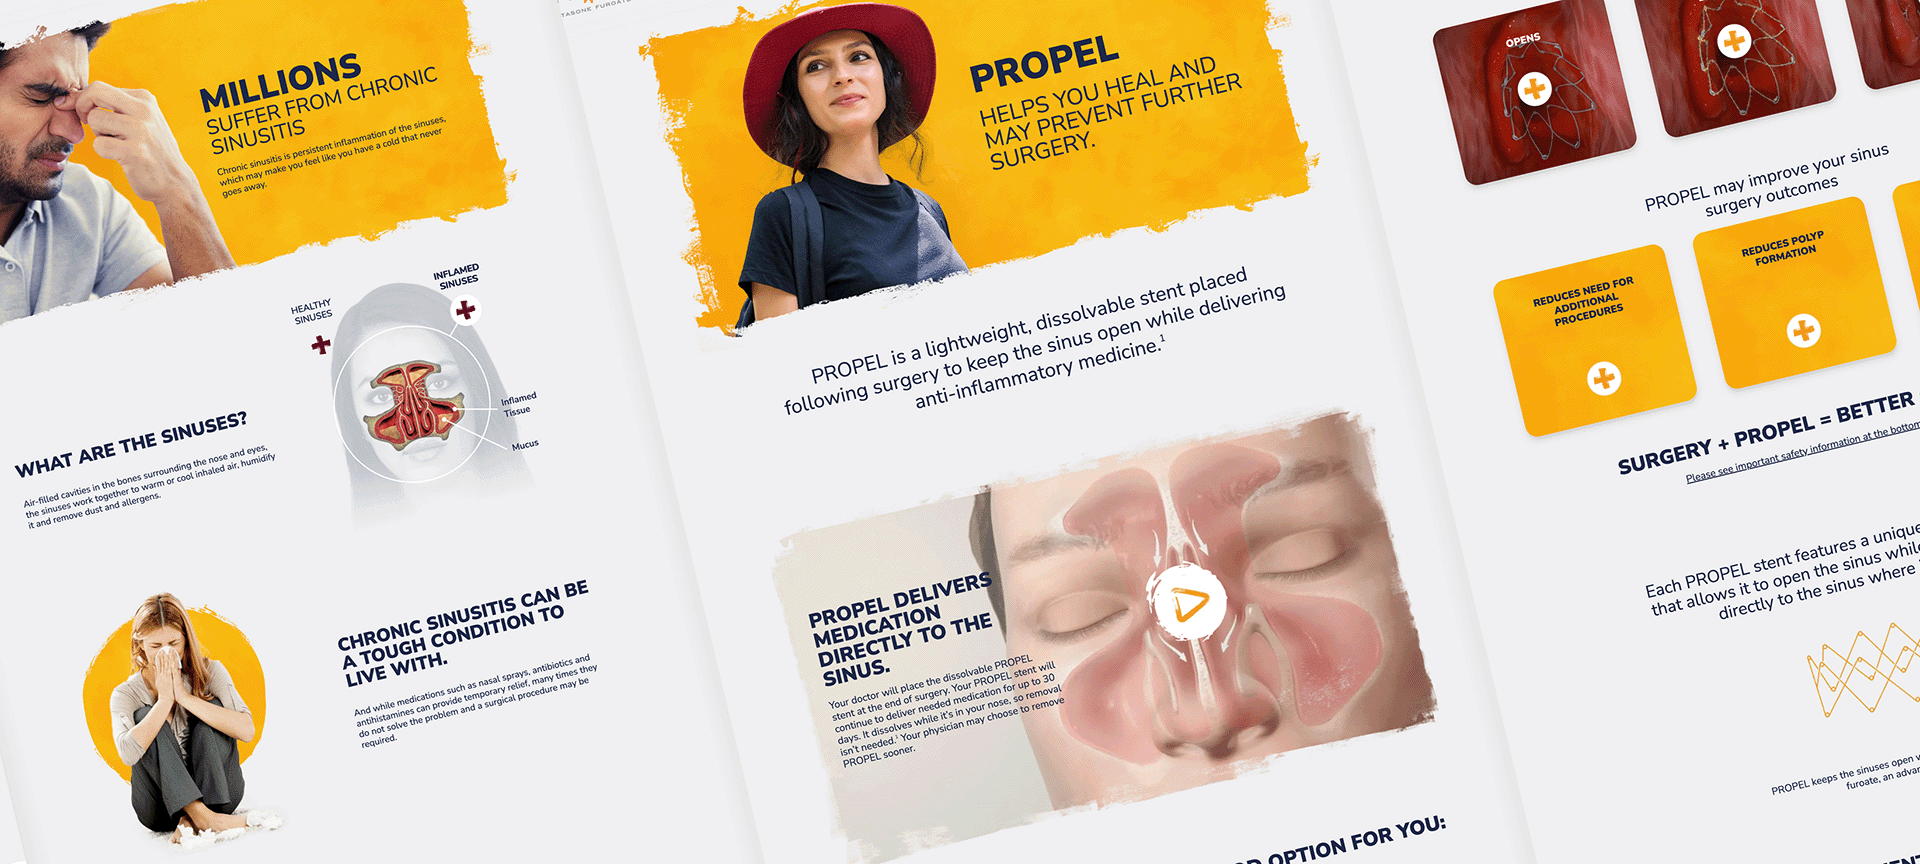 Collage of images showing the Propel website design.